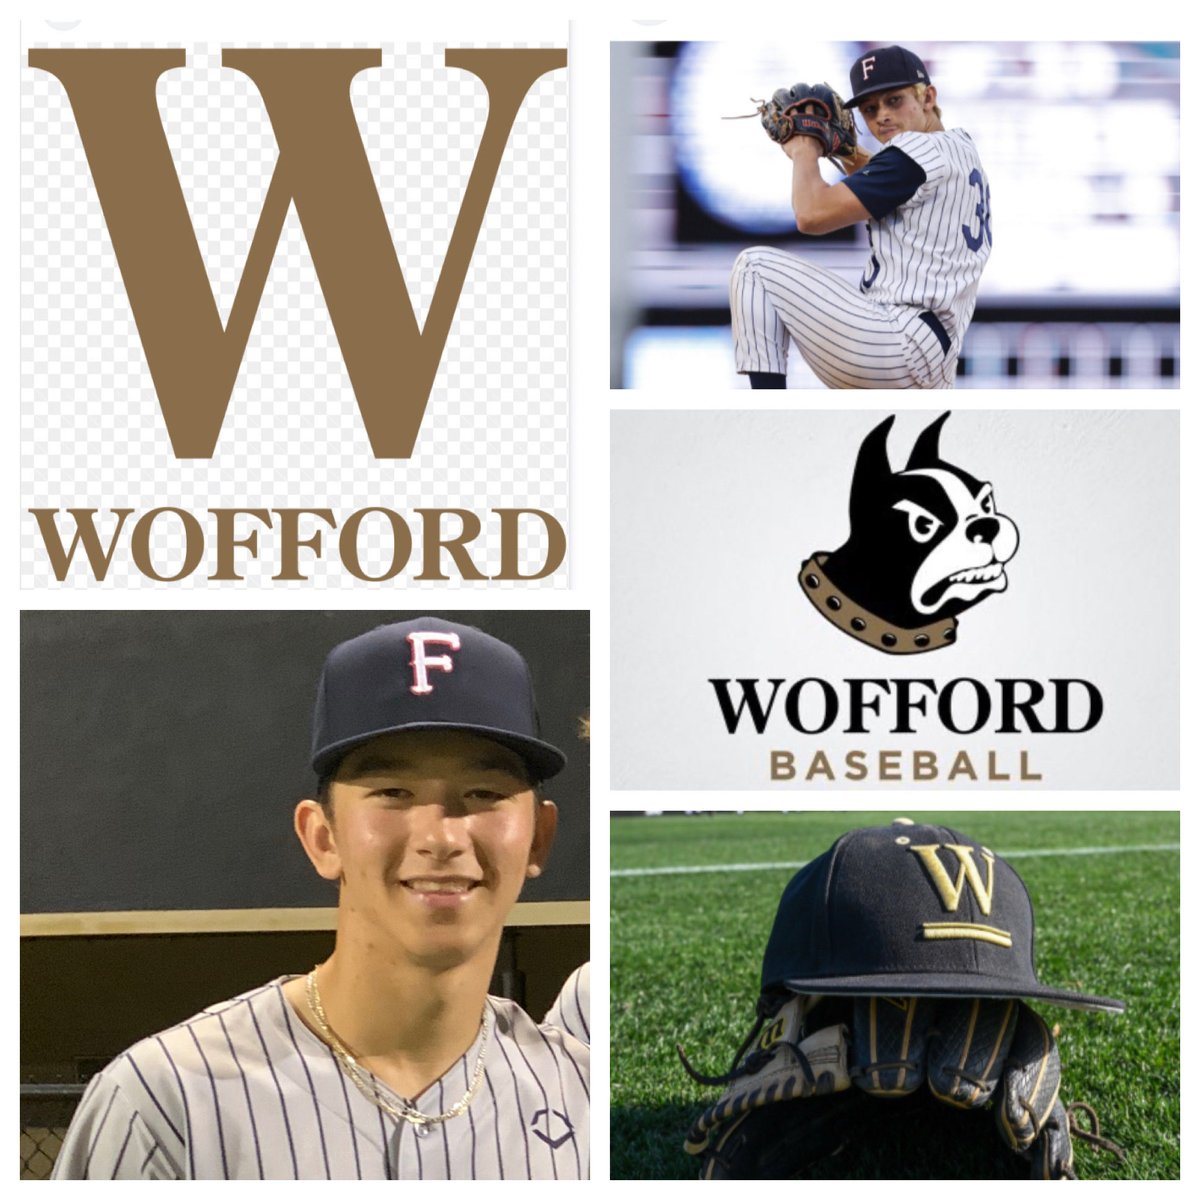 Congratulations to Farragut Admirals Baseball Junior COLE DRAPER! ⚾️⚓️ Cole has committed to continue his education and baseball career in 2 years at Wofford College in Spartanburg SC ⚾️ Last May, Cole pitched a complete game shutout vs HVA in the Class 4A State Championship Game